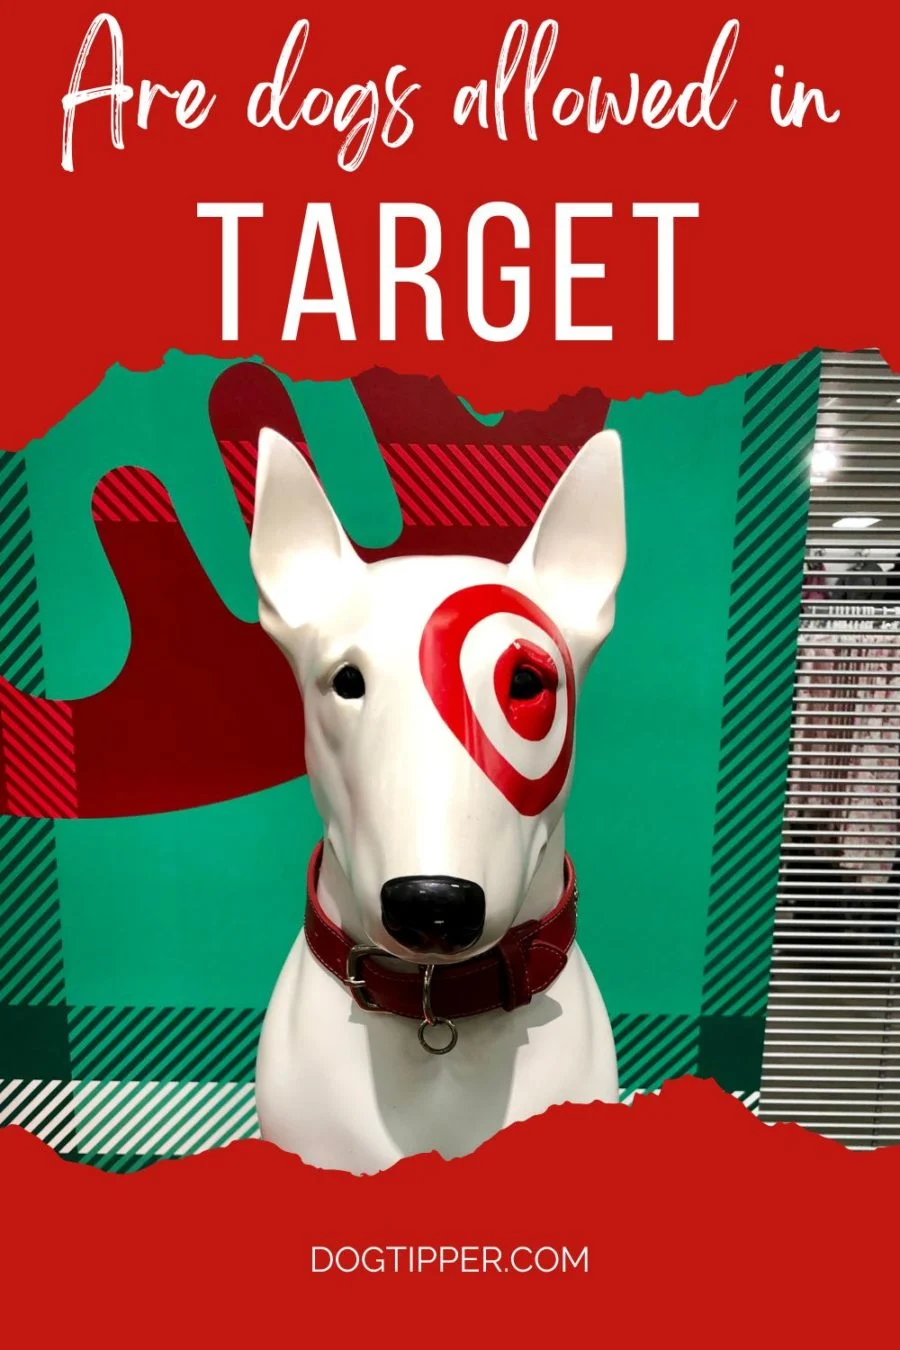 Are Dogs Allowed in Target?